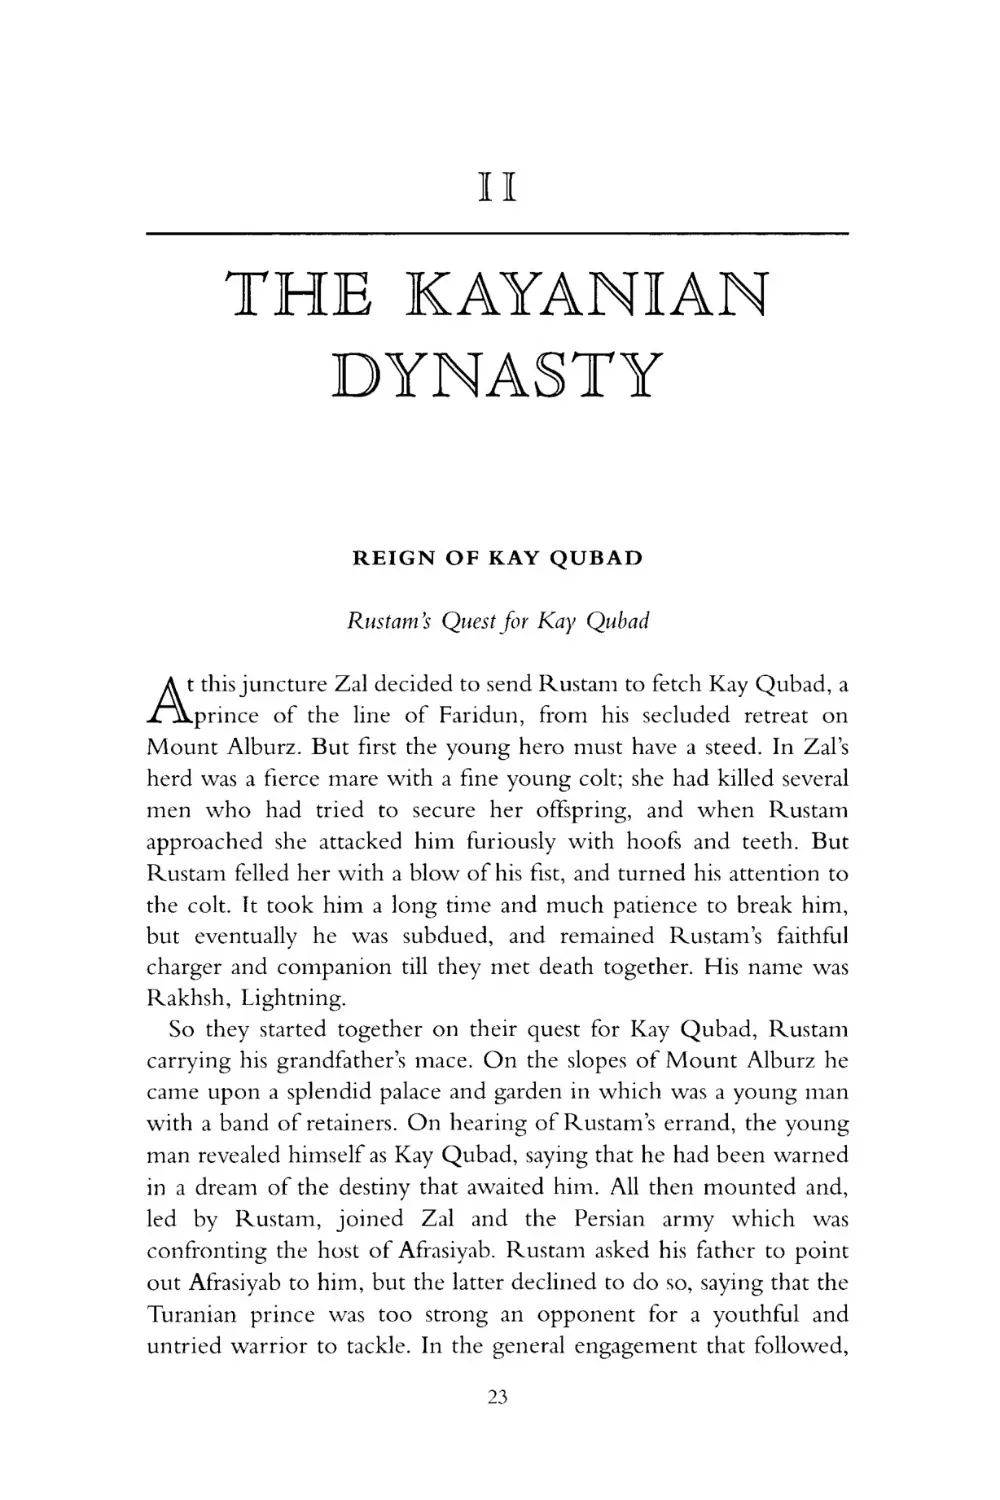 II THE KAYANIAN DYNASTY
REIGN OF KAY QUBAD
Rustam's Quest for Kay Qubad